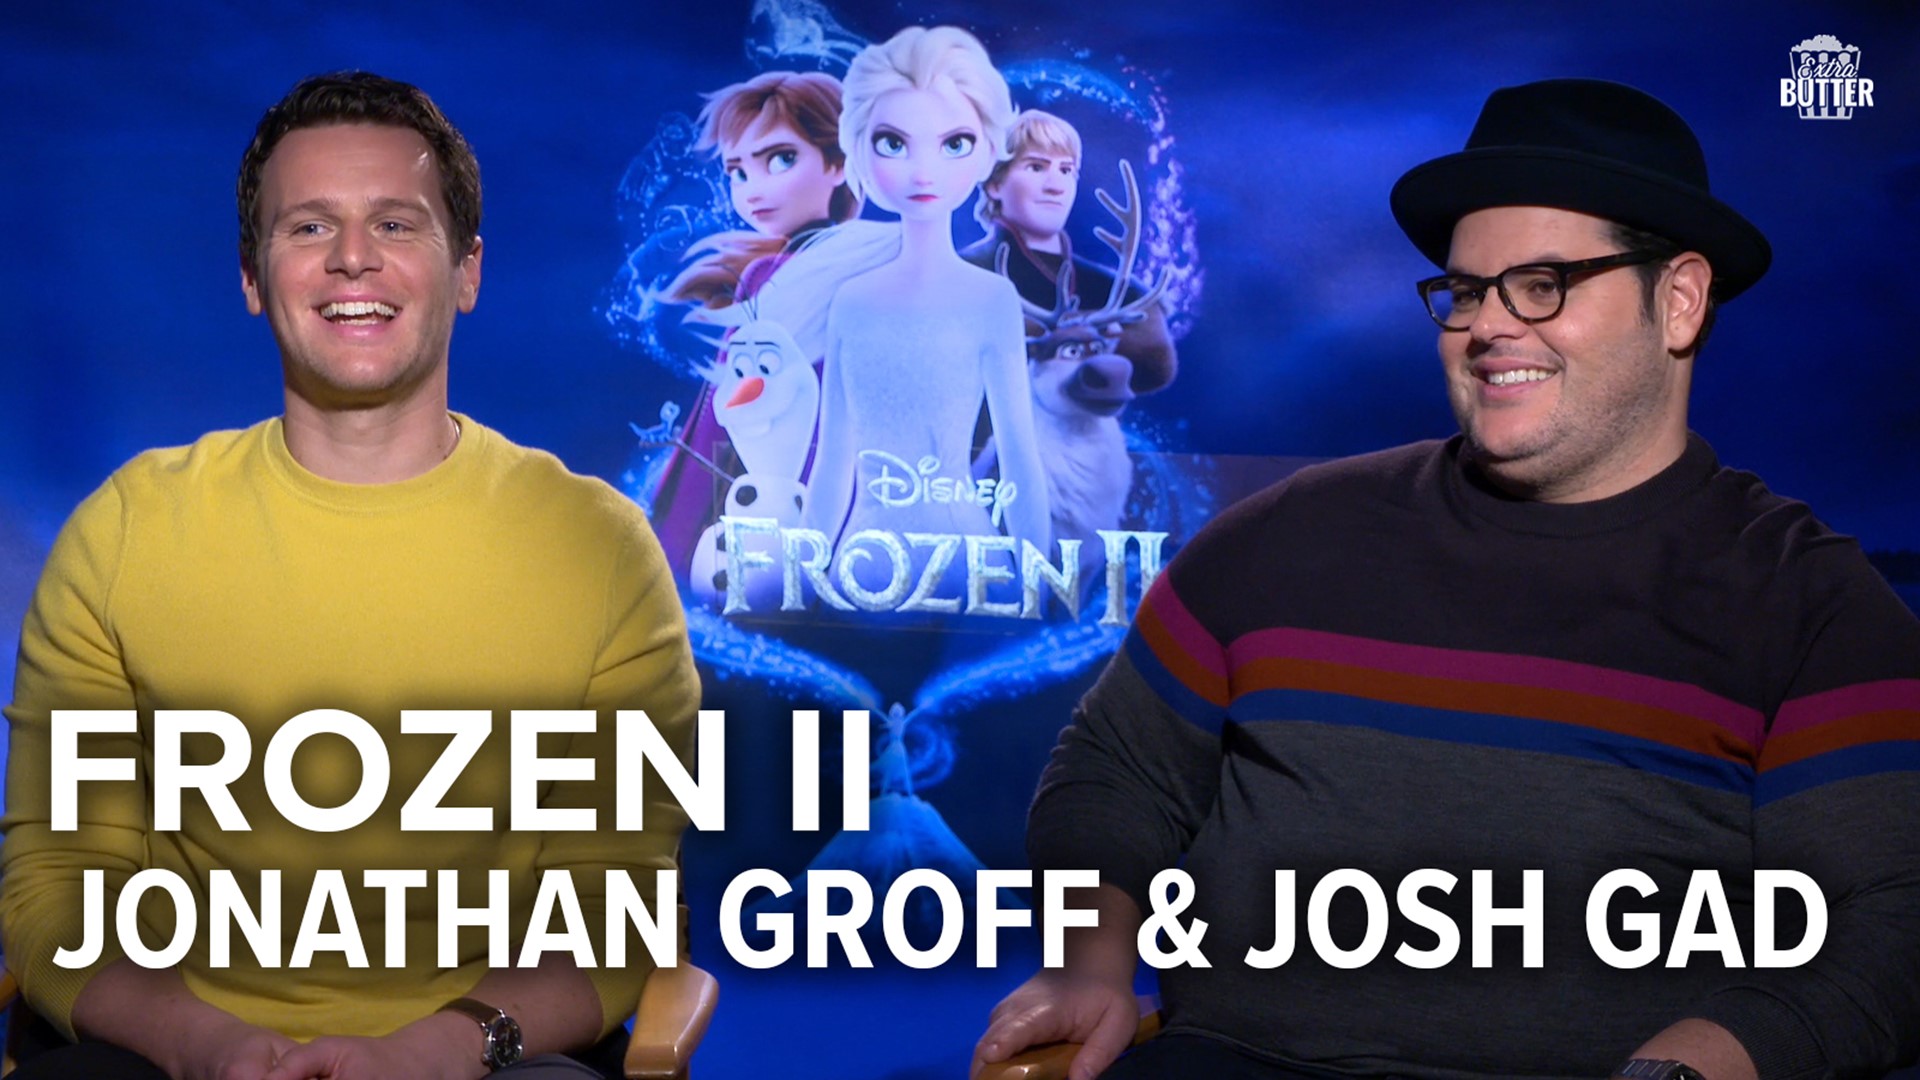 Josh Gad and Jonathan Groff talk about the new epic songs in 'Frozen 2' including an 80's power ballad for Kristoff.